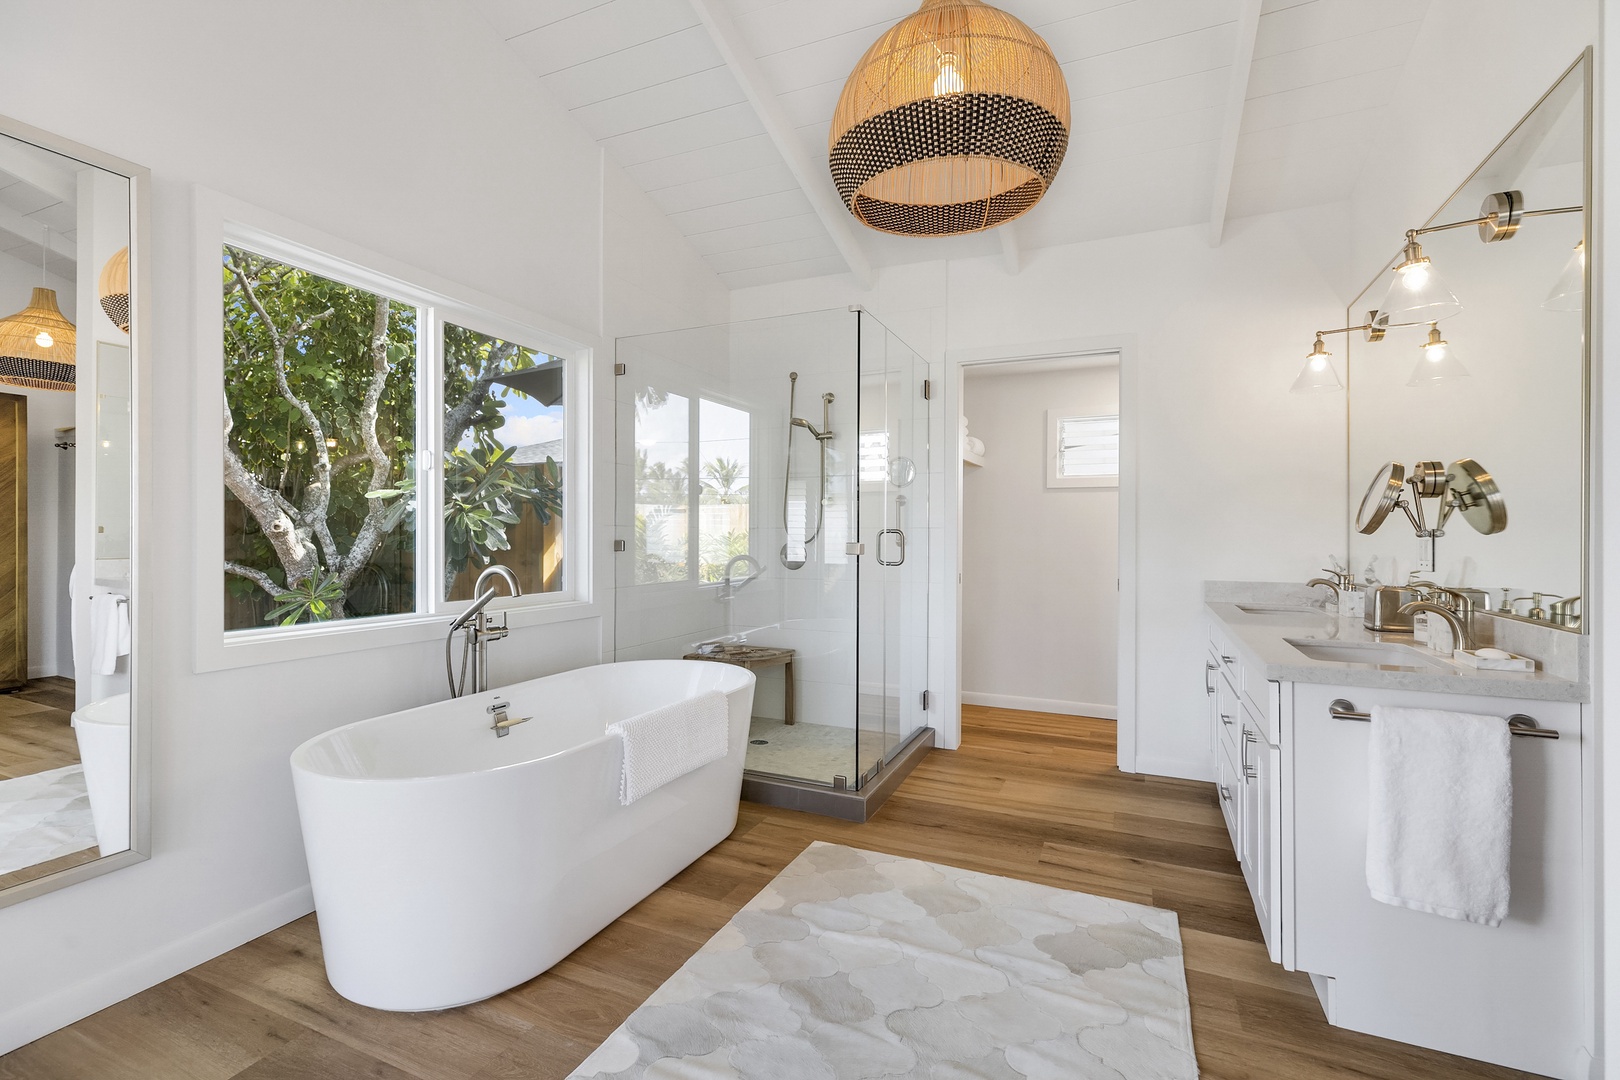 Kailua Vacation Rentals, Seahorse Beach House - Front House Ensuite Bath to Primary Bedroom